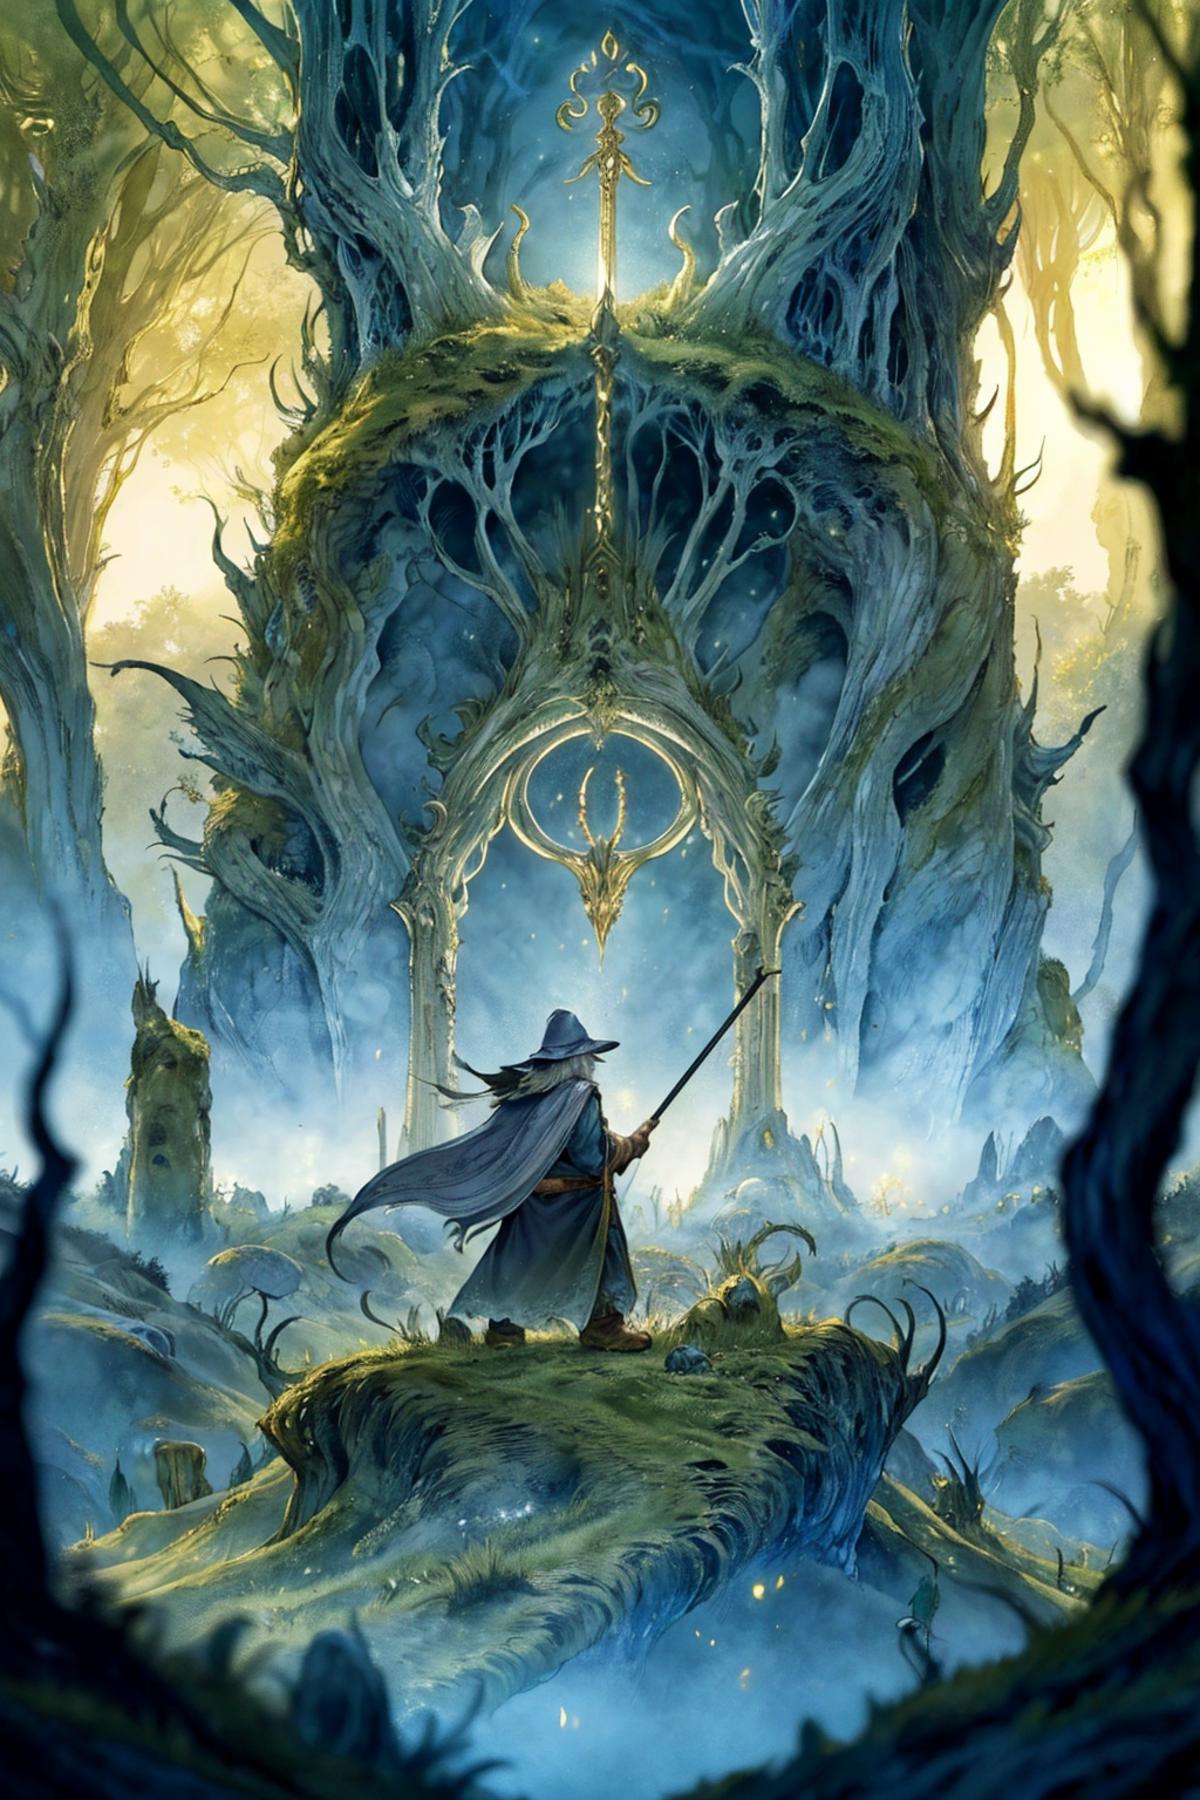 A wizard holding a staff in front of an arched doorway.